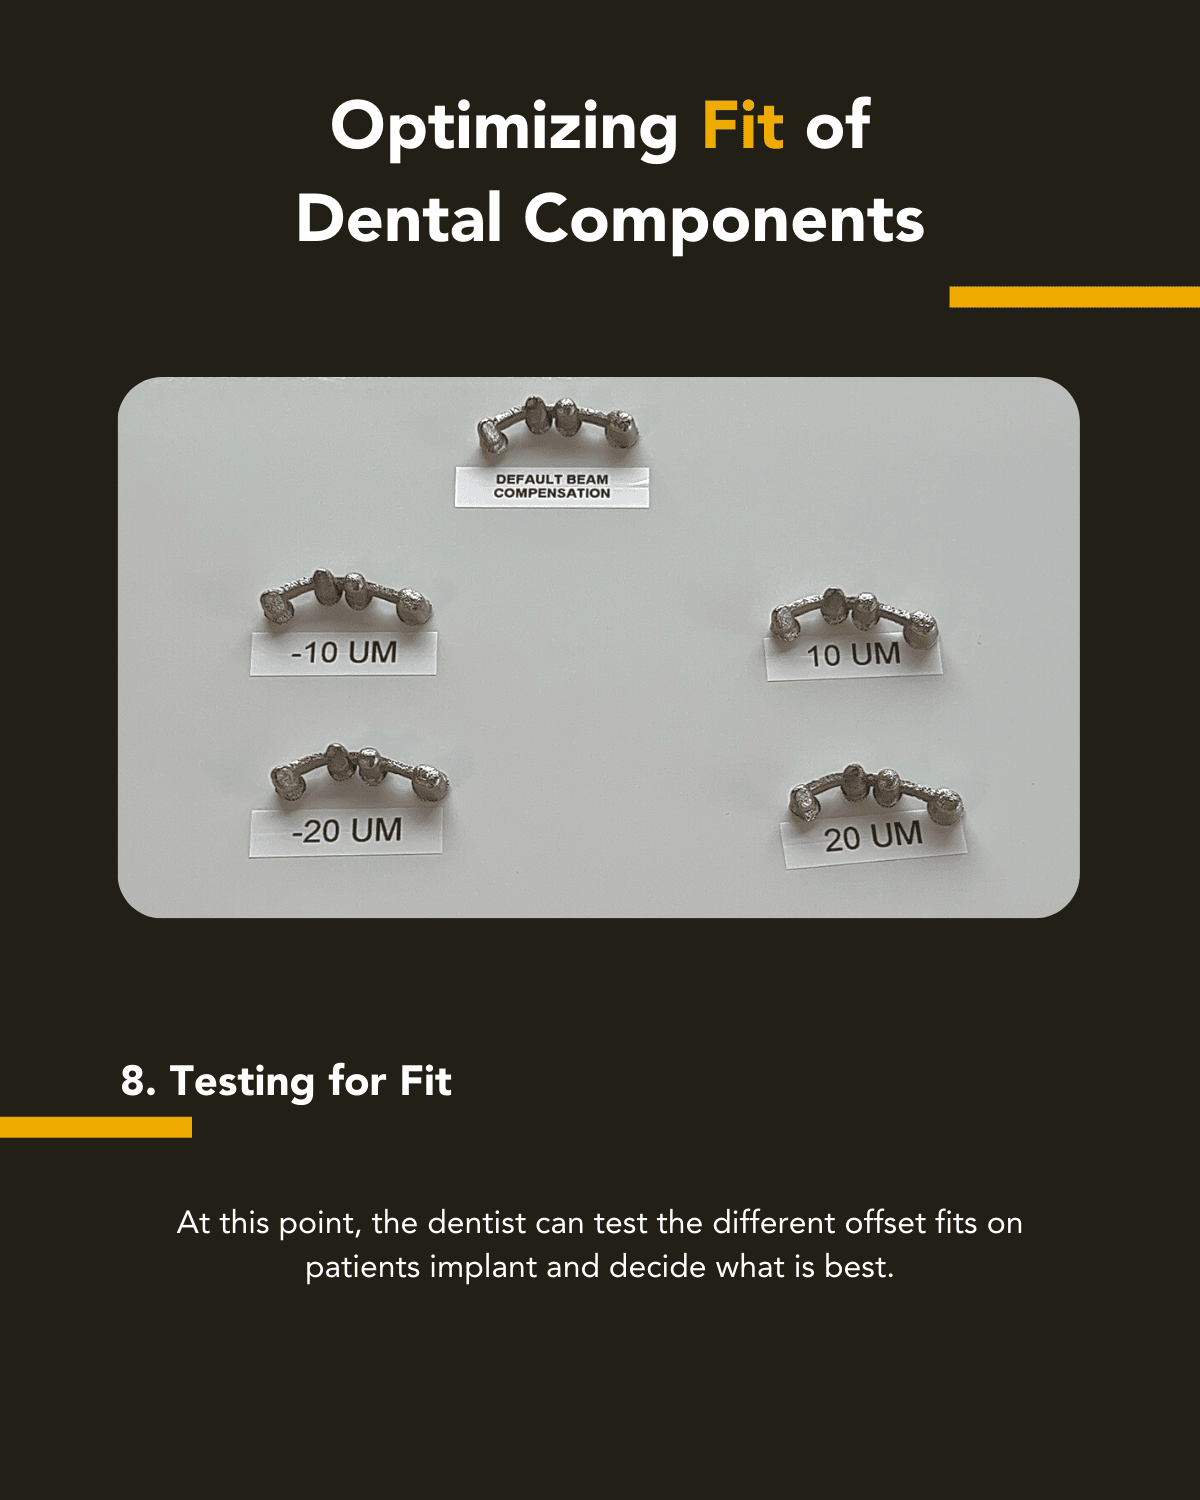 Step 8: Testing for fit: At this point, the dentist an test the different offset fits on patients implant and decide what is best.